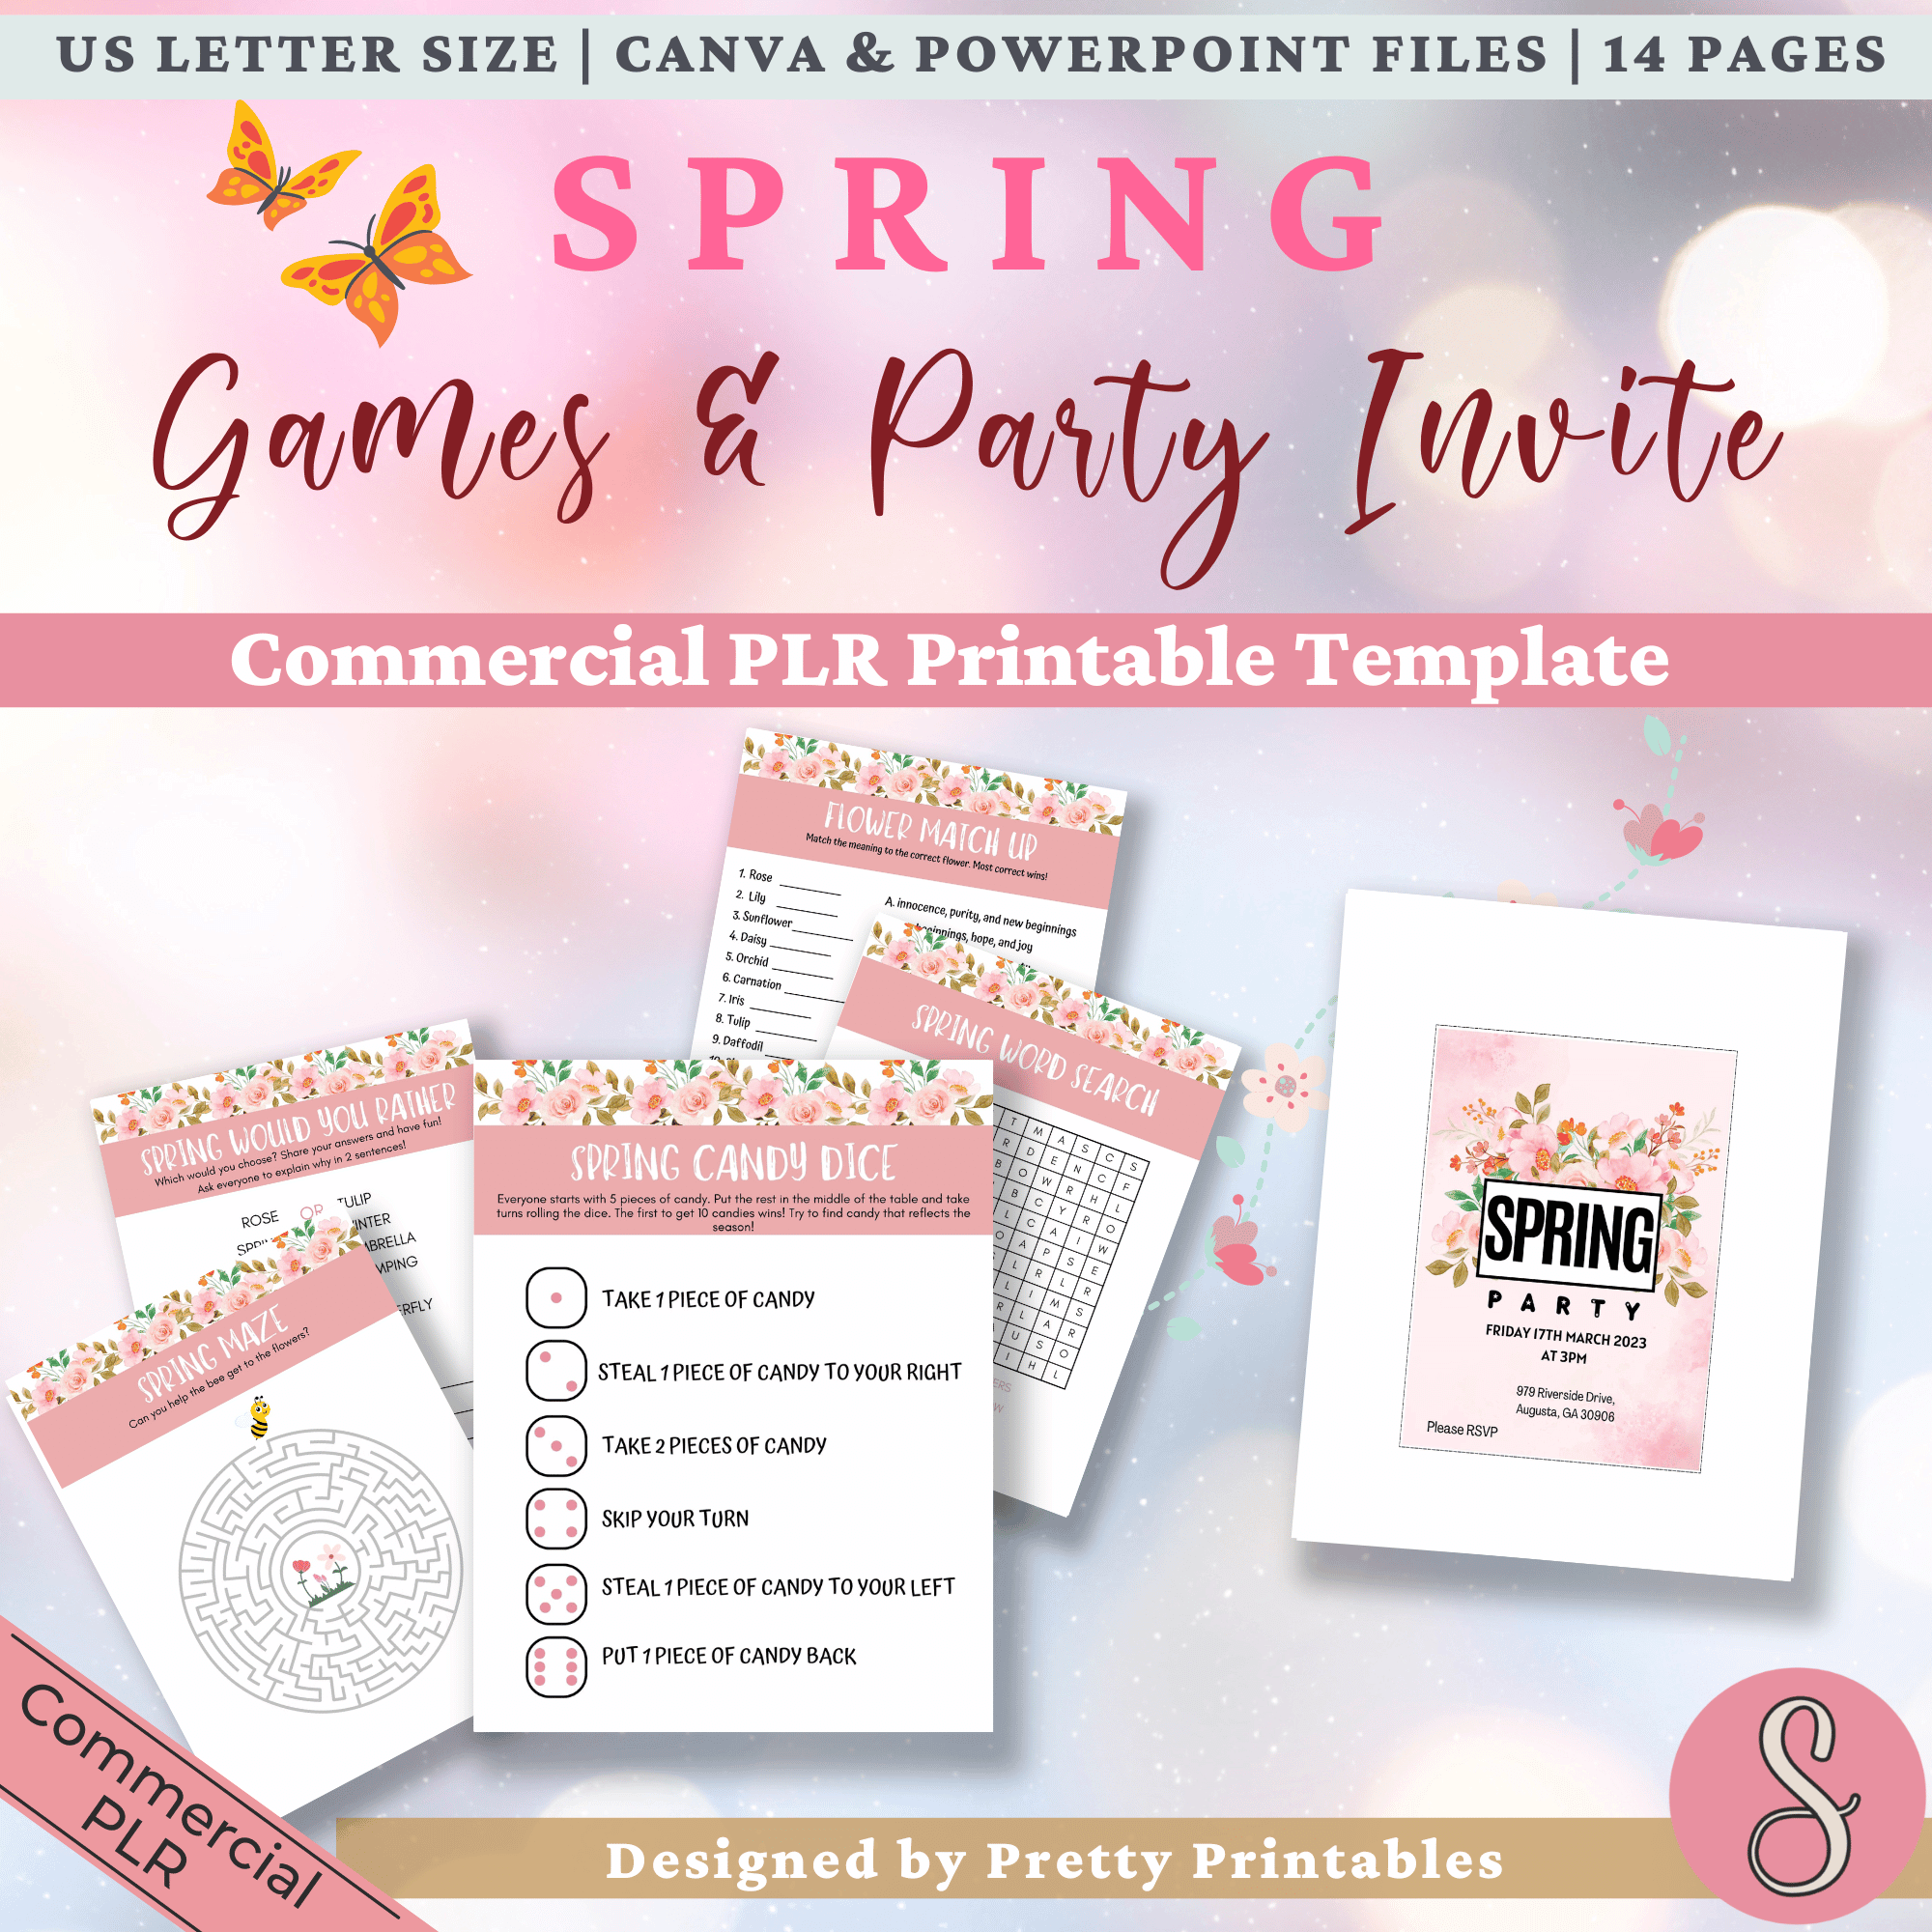 Spring Games & Party Invite Commercial PLR Printable Template